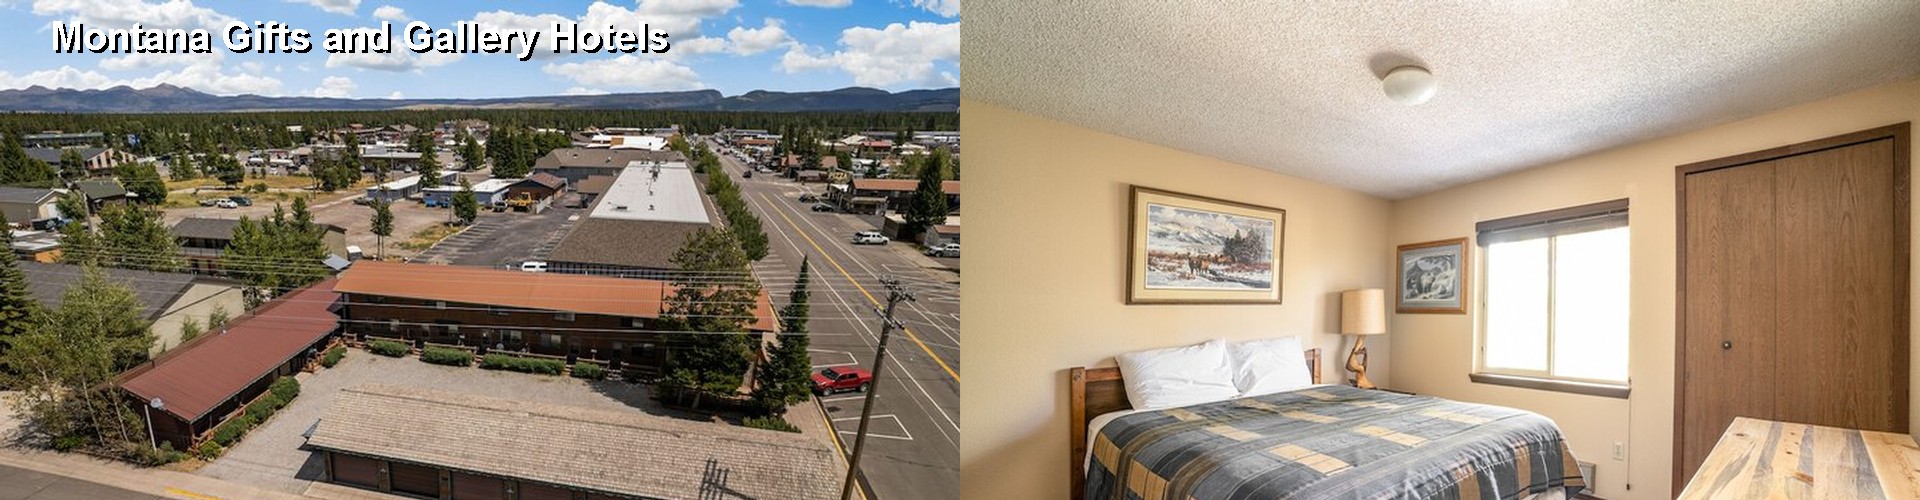 5 Best Hotels near Montana Gifts and Gallery